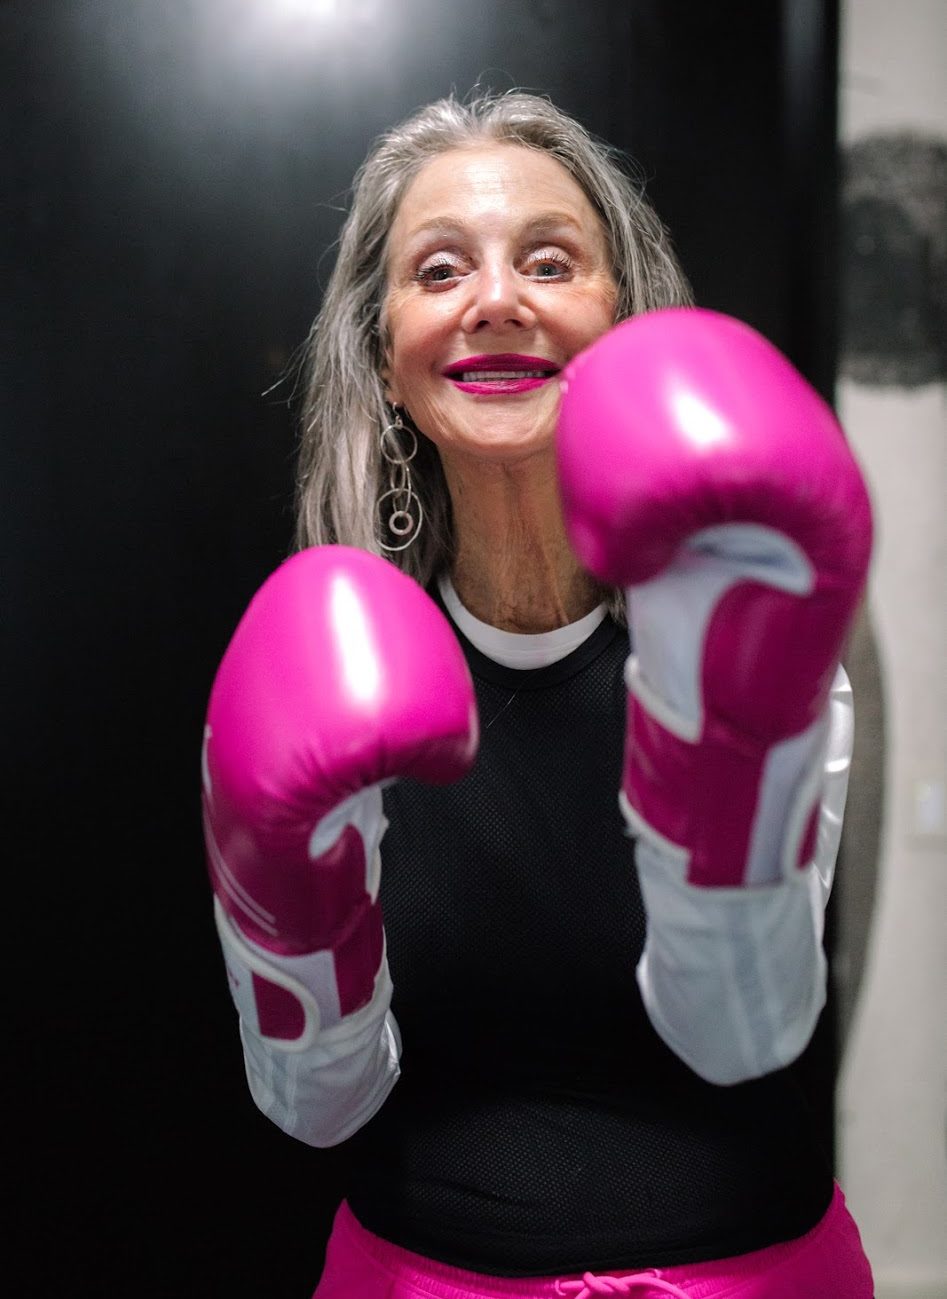 Boxing For Over 50 Women